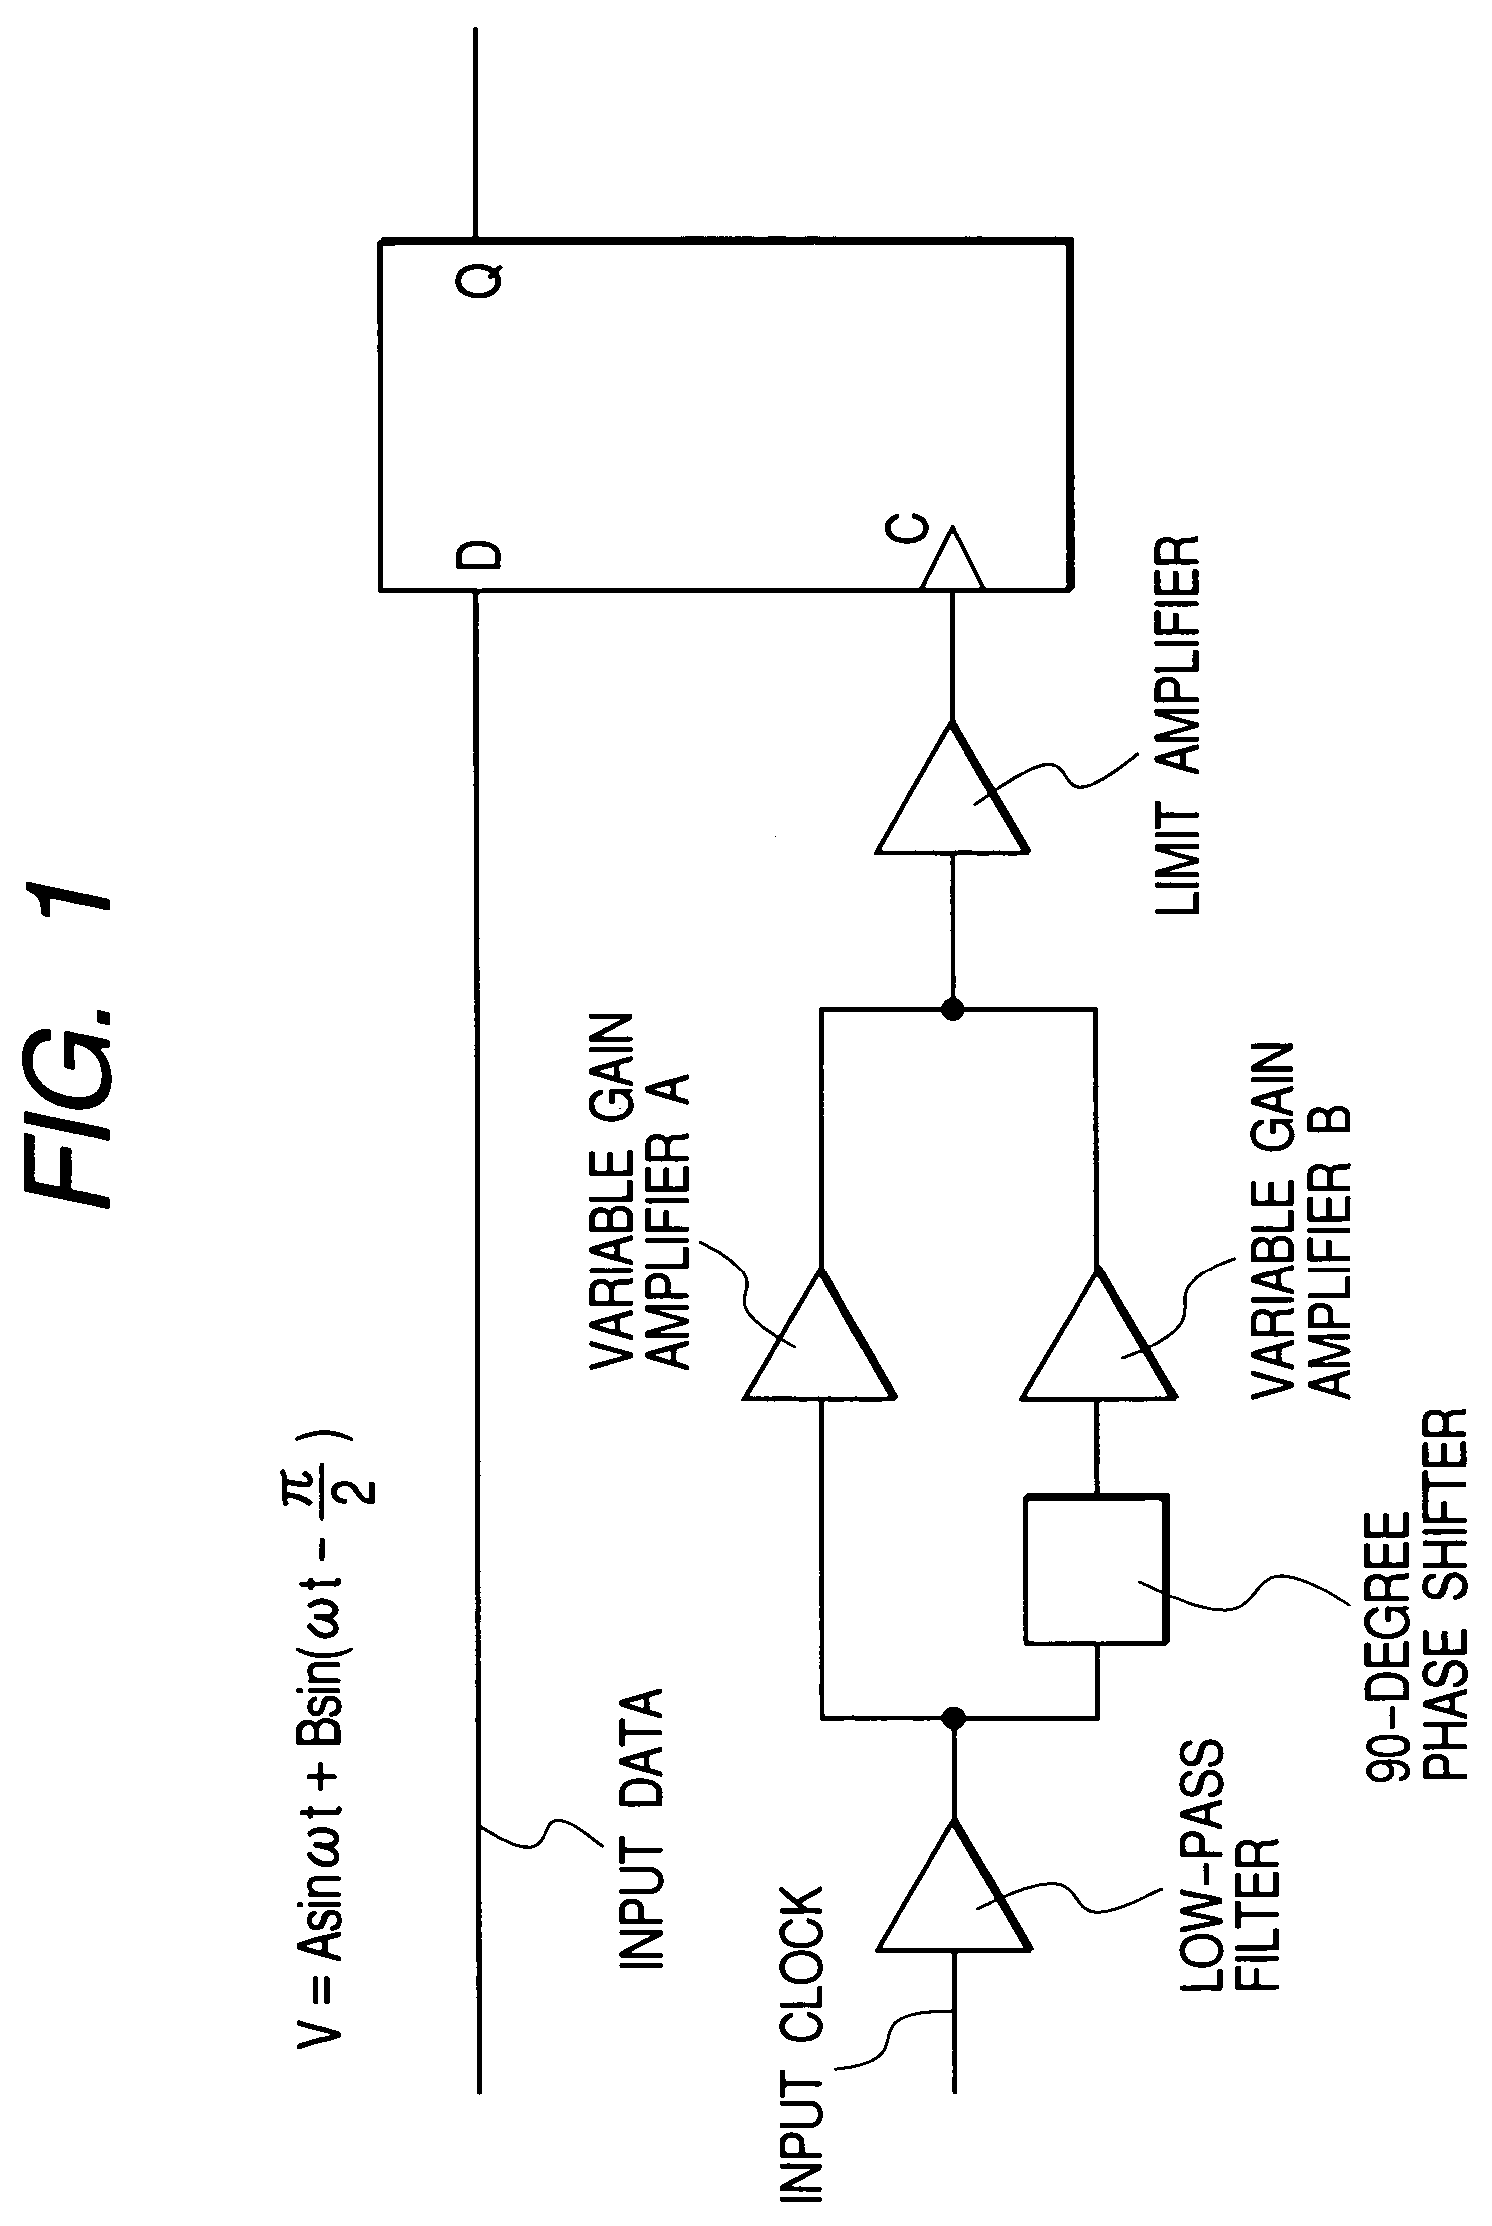 Phase shifter, phase shifting method and skew compensation system for high-speed parallel signaling